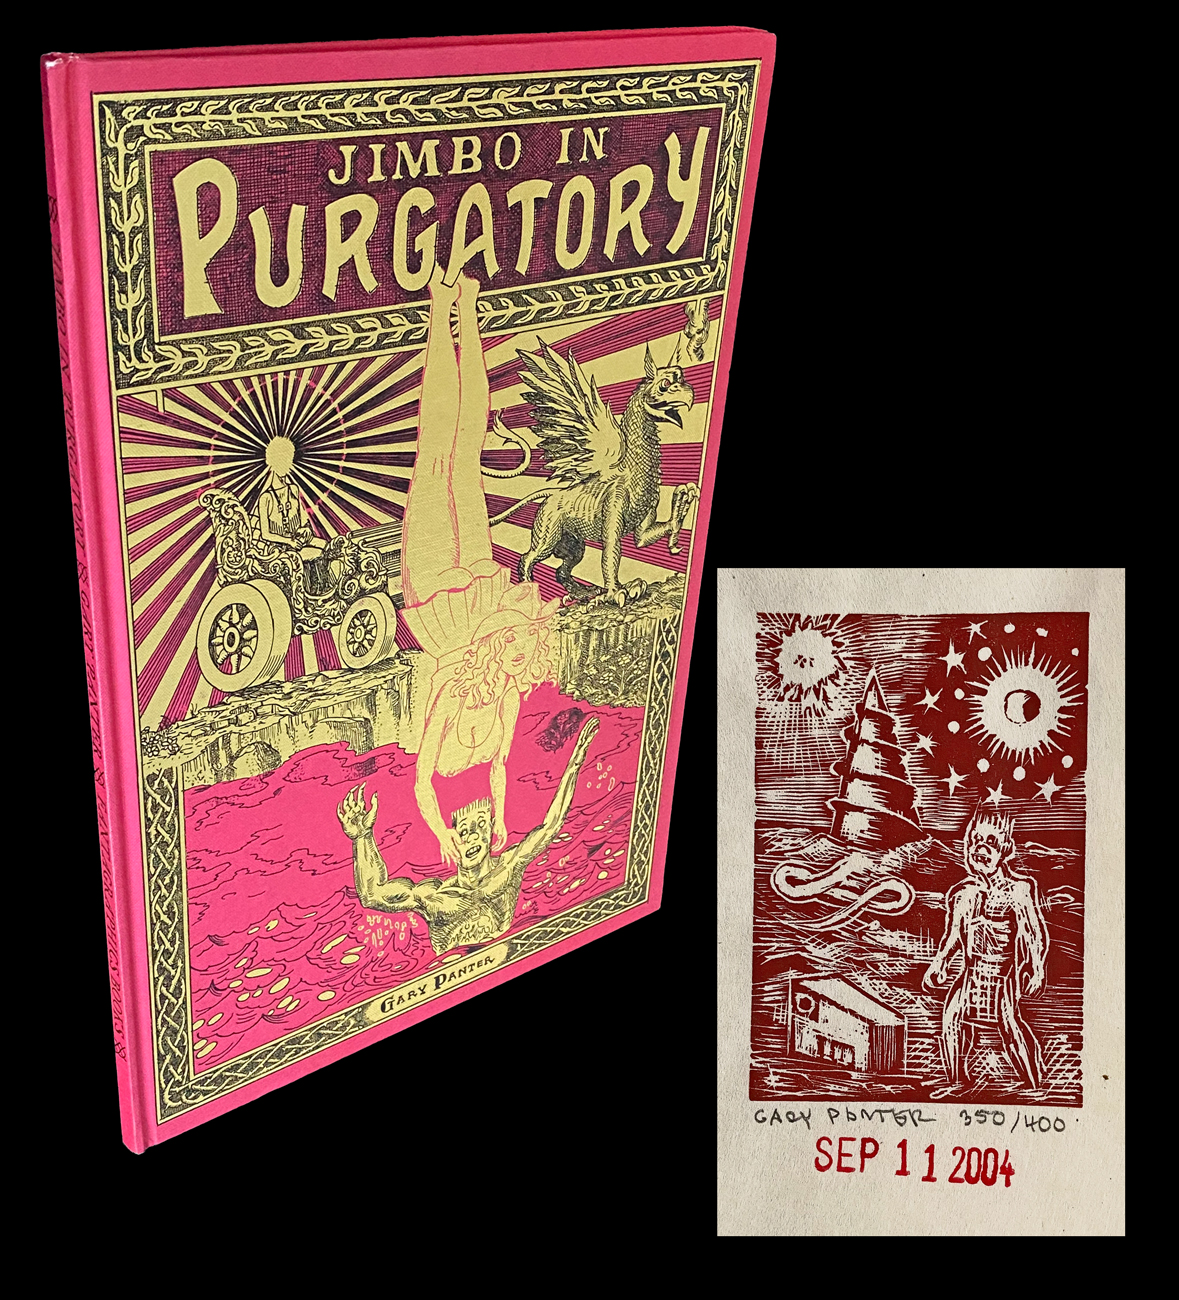 [Signed Limited Edition] Jimbo in Purgatory : Being a Mis-Recounting of Dante Alighieri's Divine Comedy in Pictures and Un-Numbered Footnotes - Panter, Gary